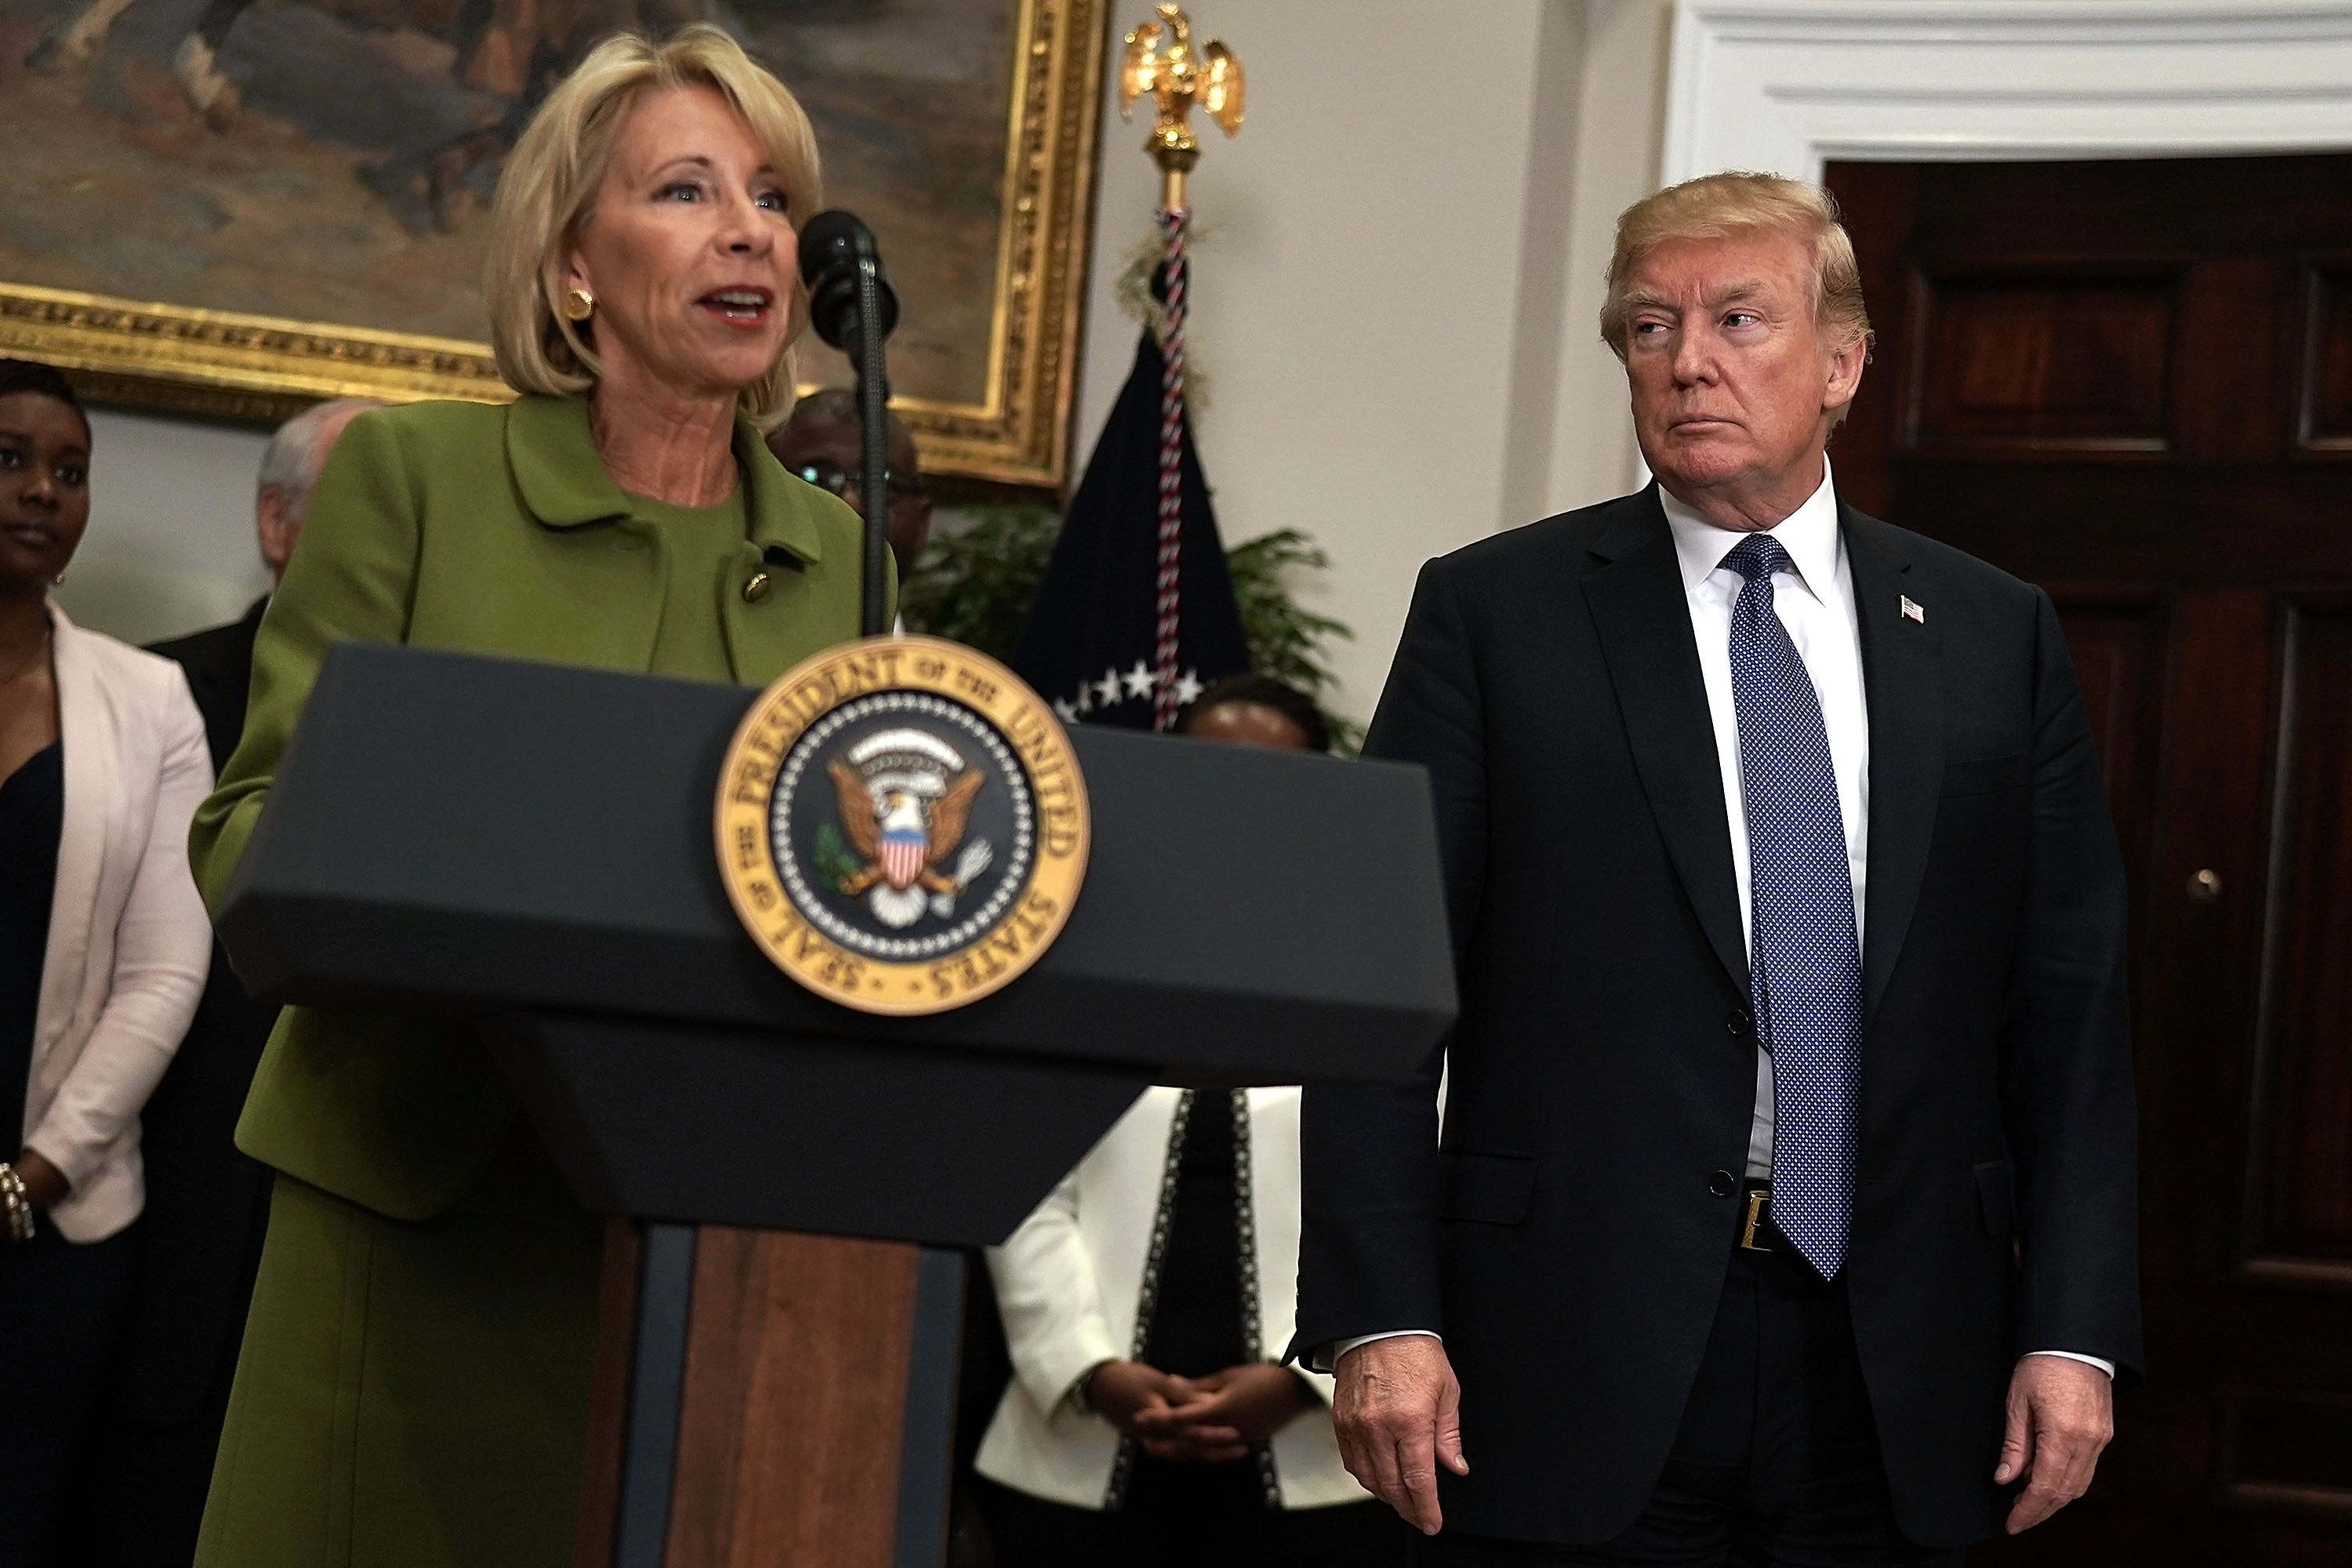 U.S. Secretary of Education Betsy DeVos (L) speaks as President Donald Trump (R) listens during an announcement in the Roosevelt Room of the White House February 27, 2018 in Washington, DC. President Trump announced that Taylor will become the new chairman and chairman of the Board of Advisors on the White House Initiative on Historically Black Colleges and Universities. (Photo by Alex Wong/Getty Images)